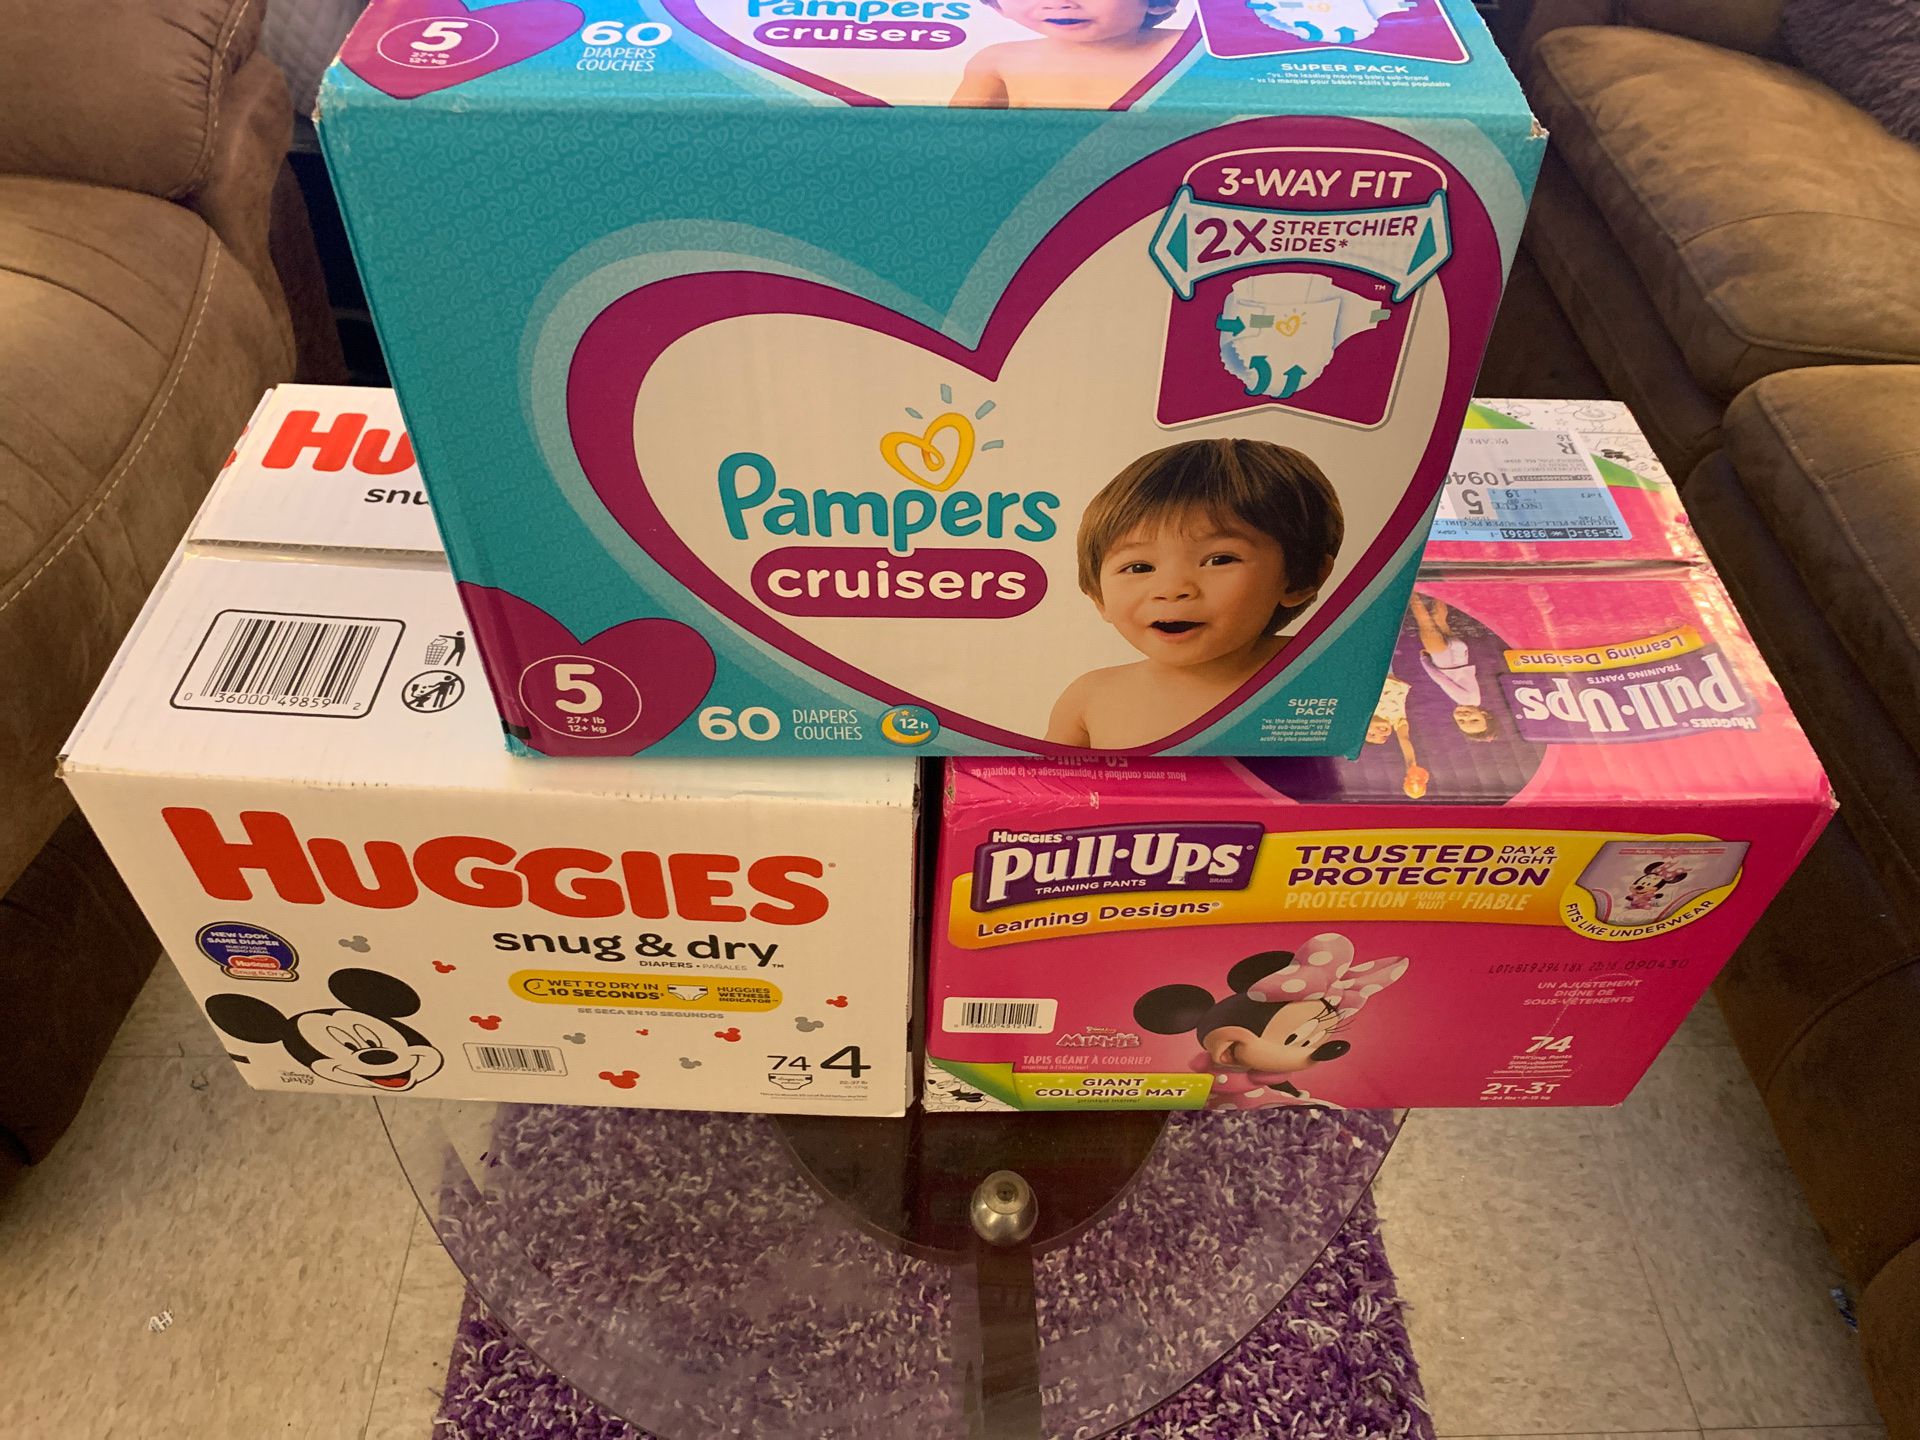 Boxes of pampers